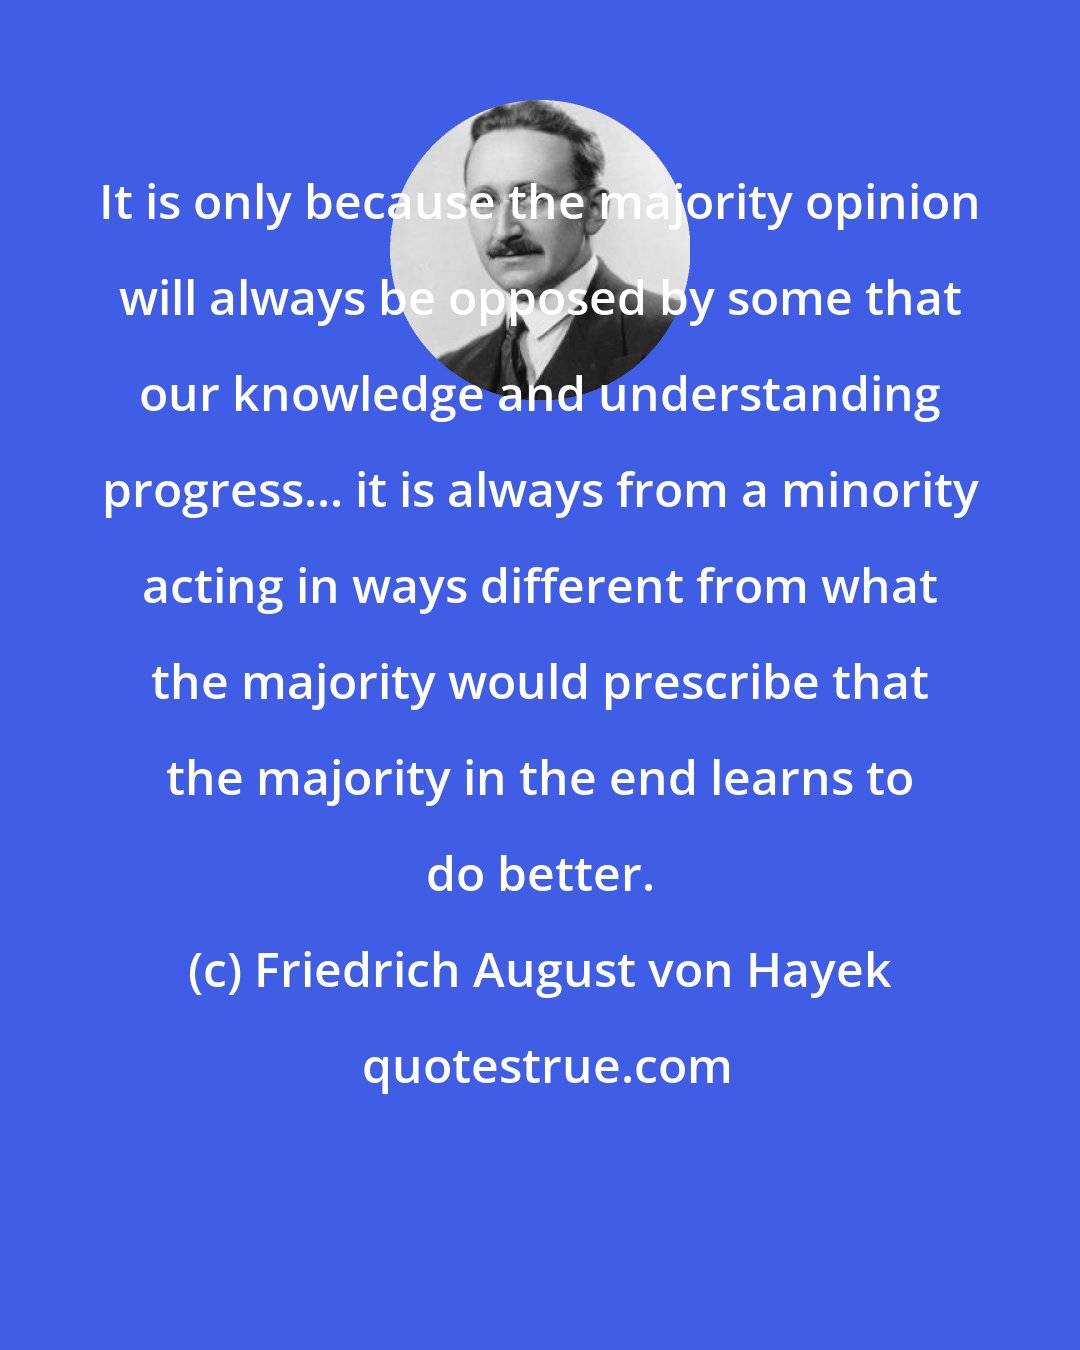 Friedrich August von Hayek: It is only because the majority opinion will always be opposed by some that our knowledge and understanding progress... it is always from a minority acting in ways different from what the majority would prescribe that the majority in the end learns to do better.